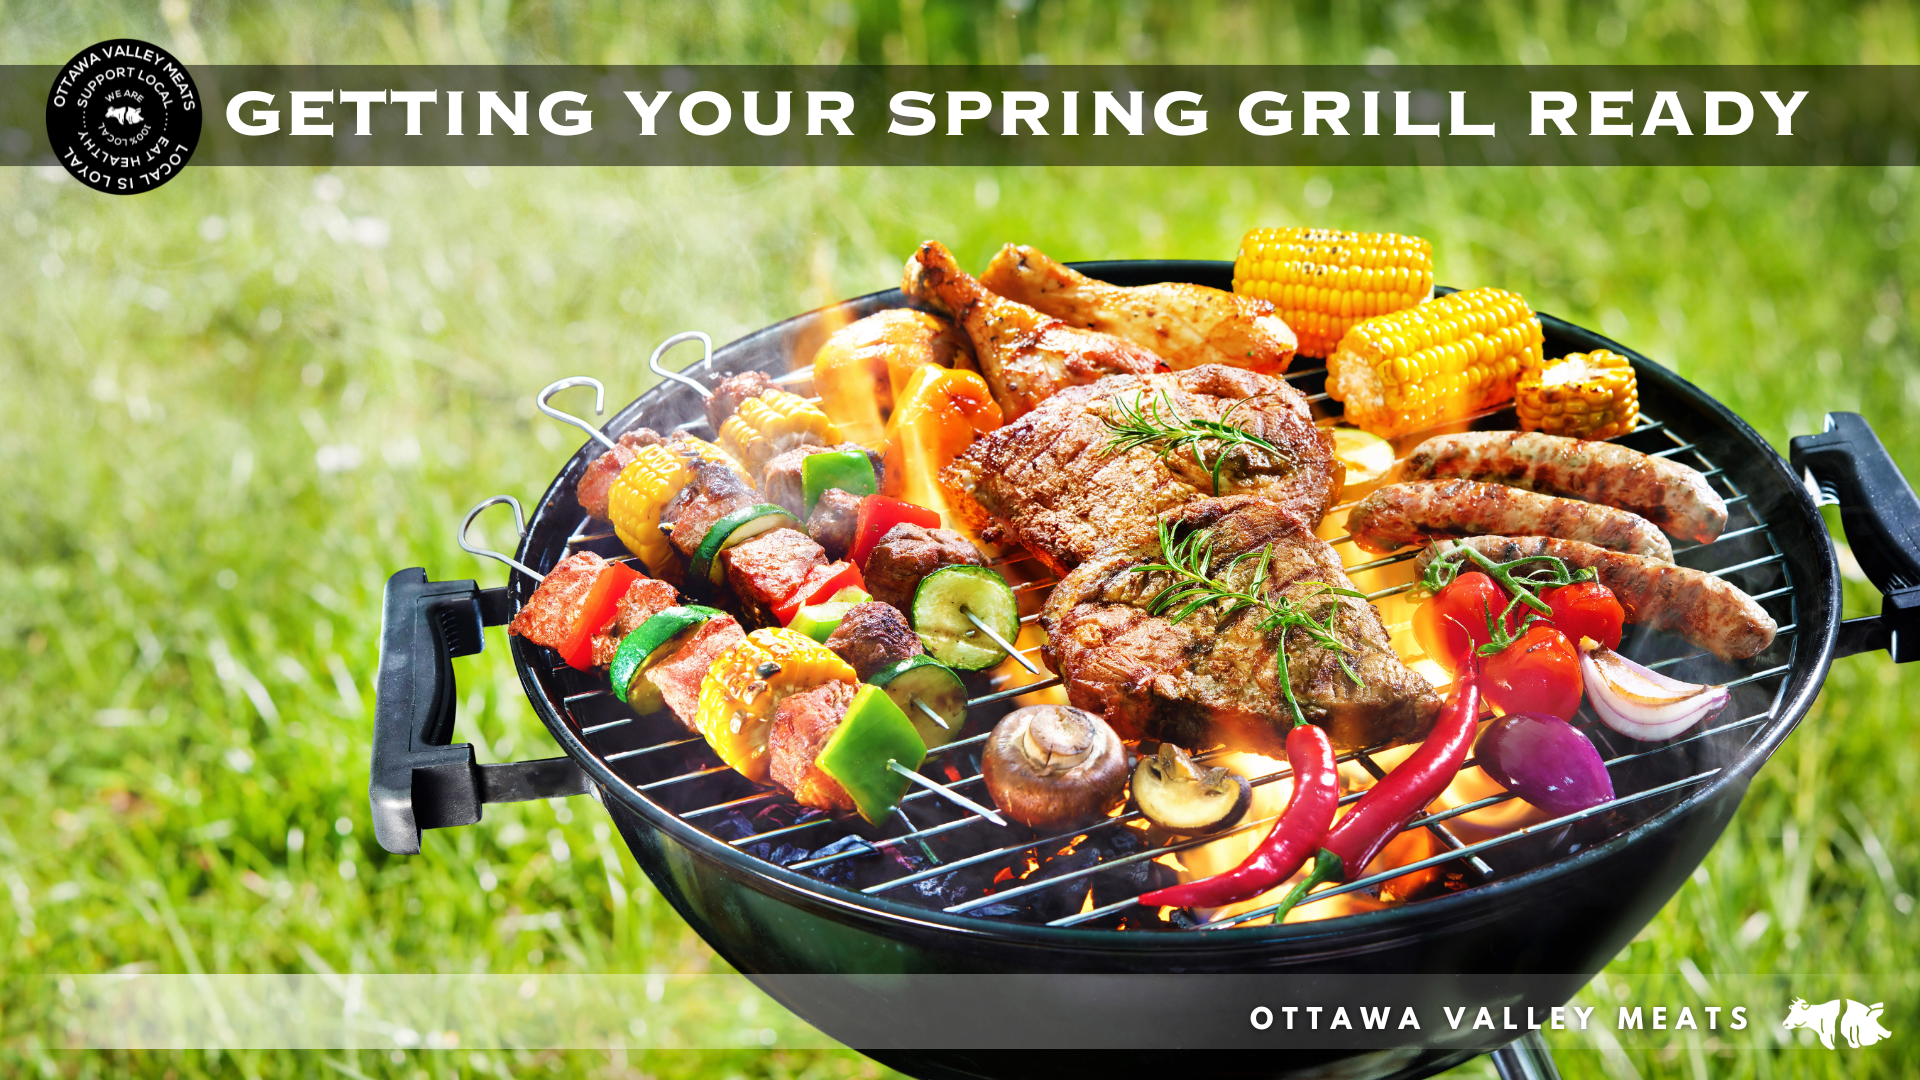 5 Tips For Getting Spring Grill Ready!